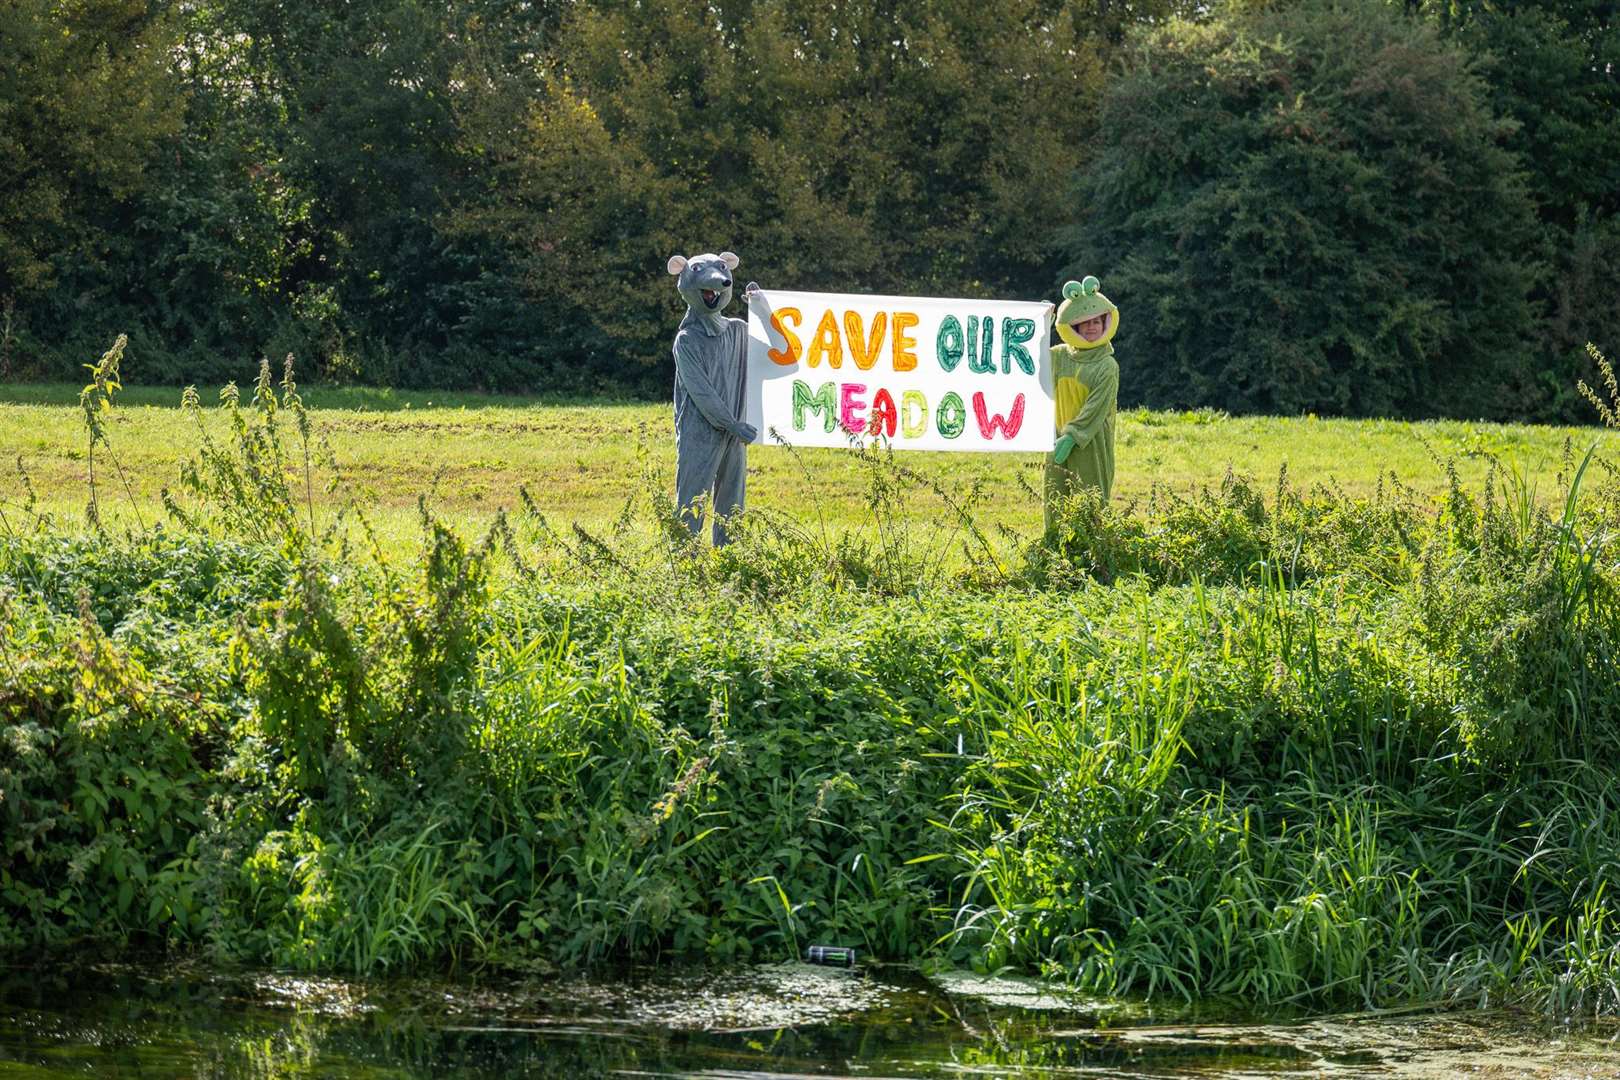 The Wind in the Willows-inspired protesters gathered at Hambrook Wincheap Meadows (16354926)